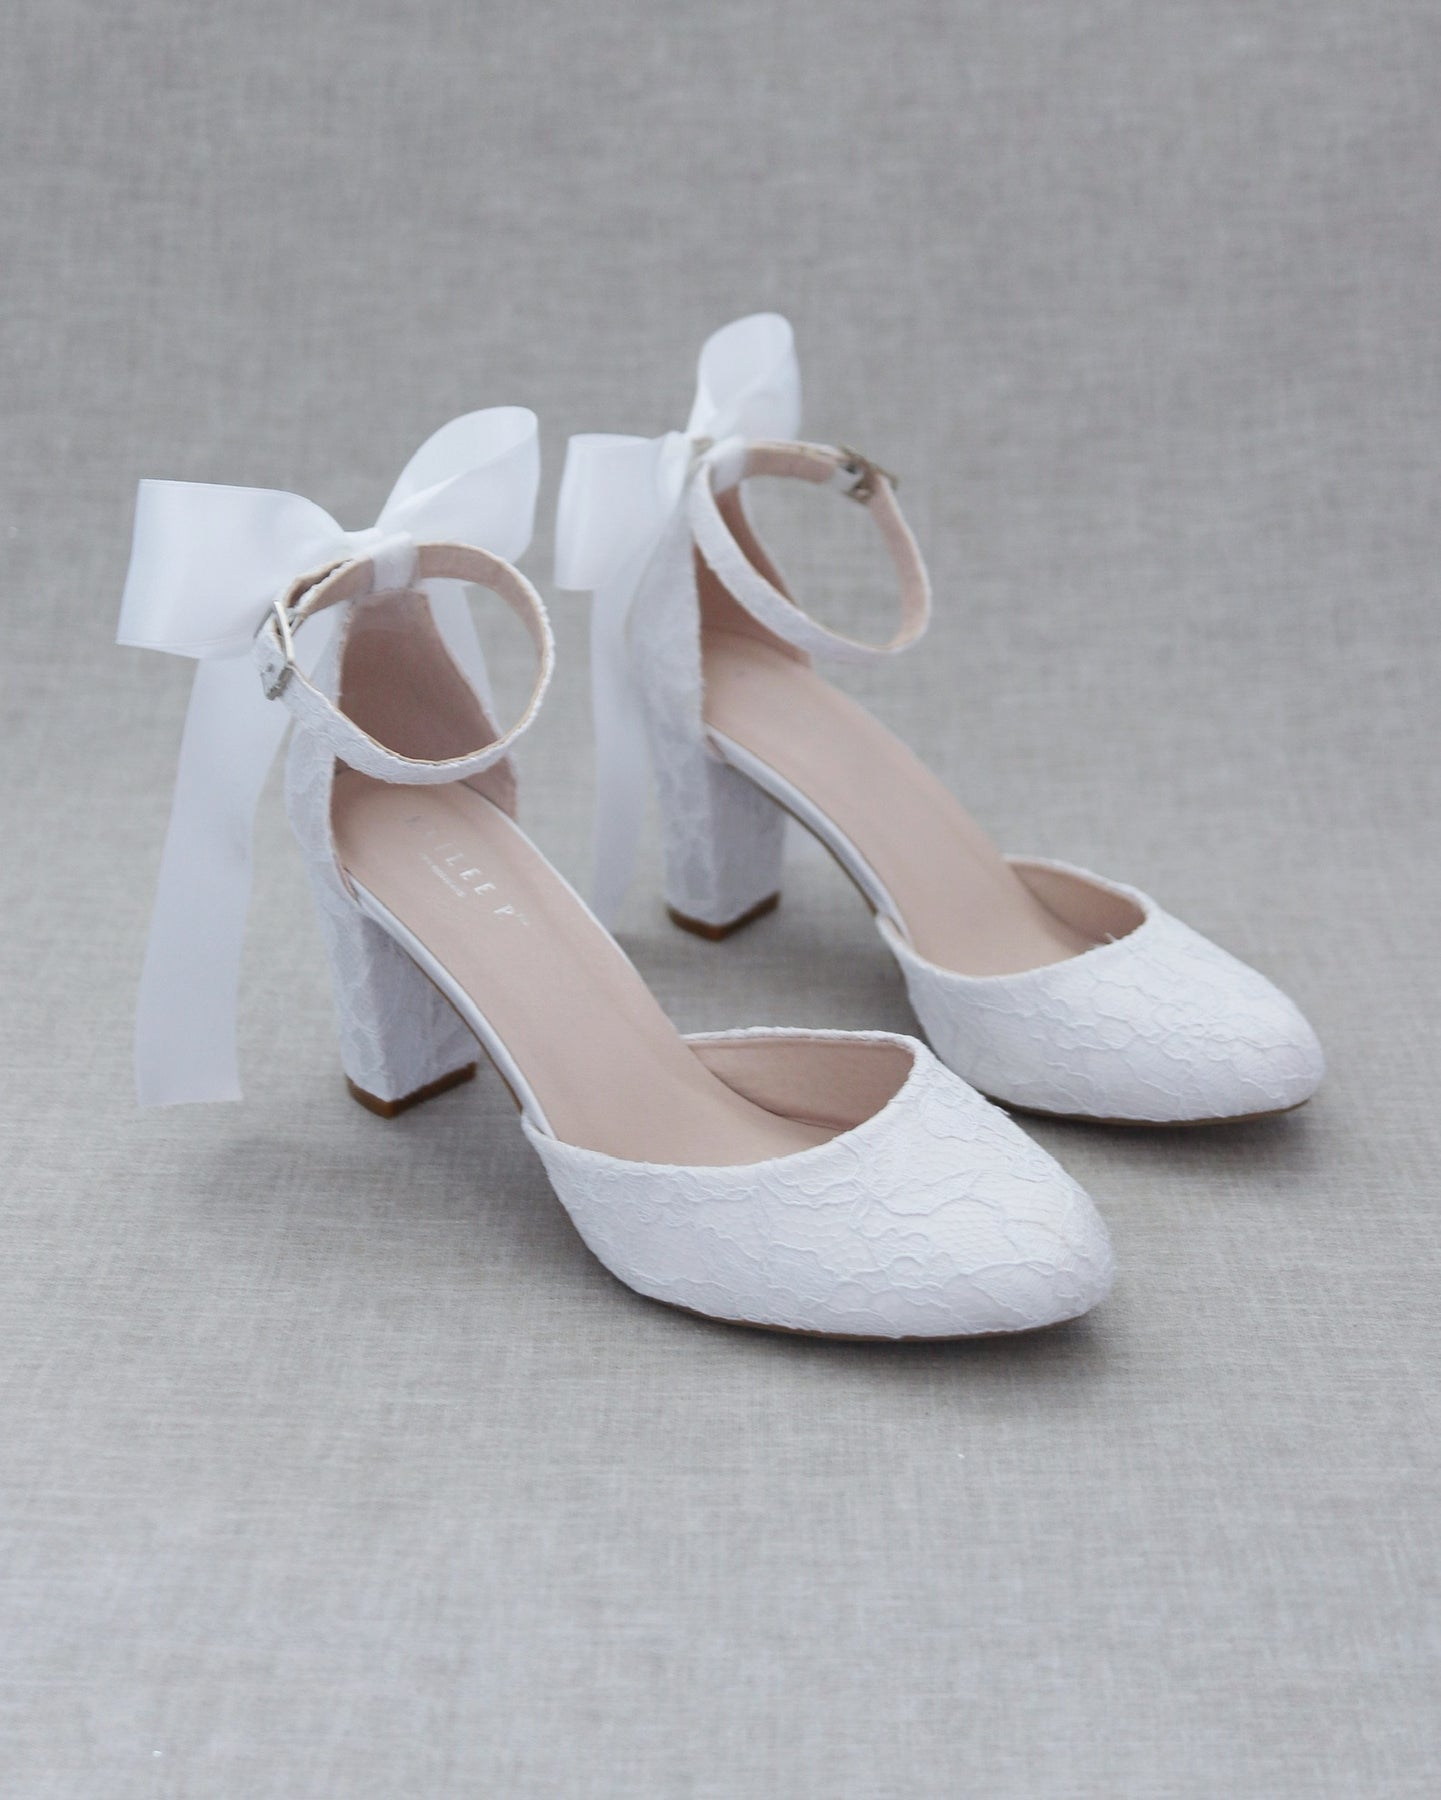 White Lace Block Heel with Satin Back Bow- Lace Shoes, White Heels, Wedding  Shoes